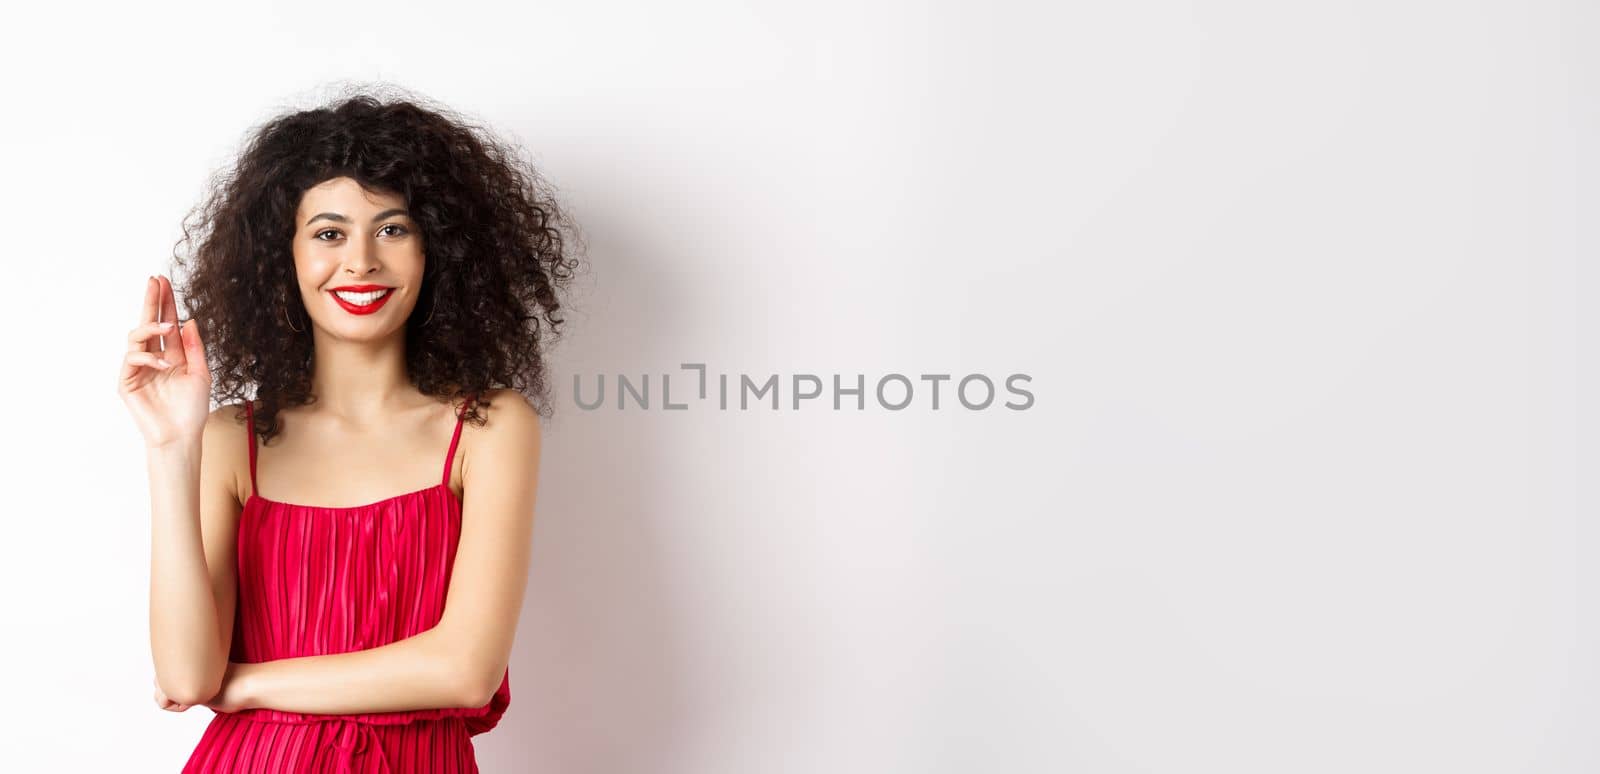 Beauty and fashion. Smiling woman with curly hair and makeup, wearing red dress, waving hand in greeting gesture, saying hello, standing on white background by Benzoix